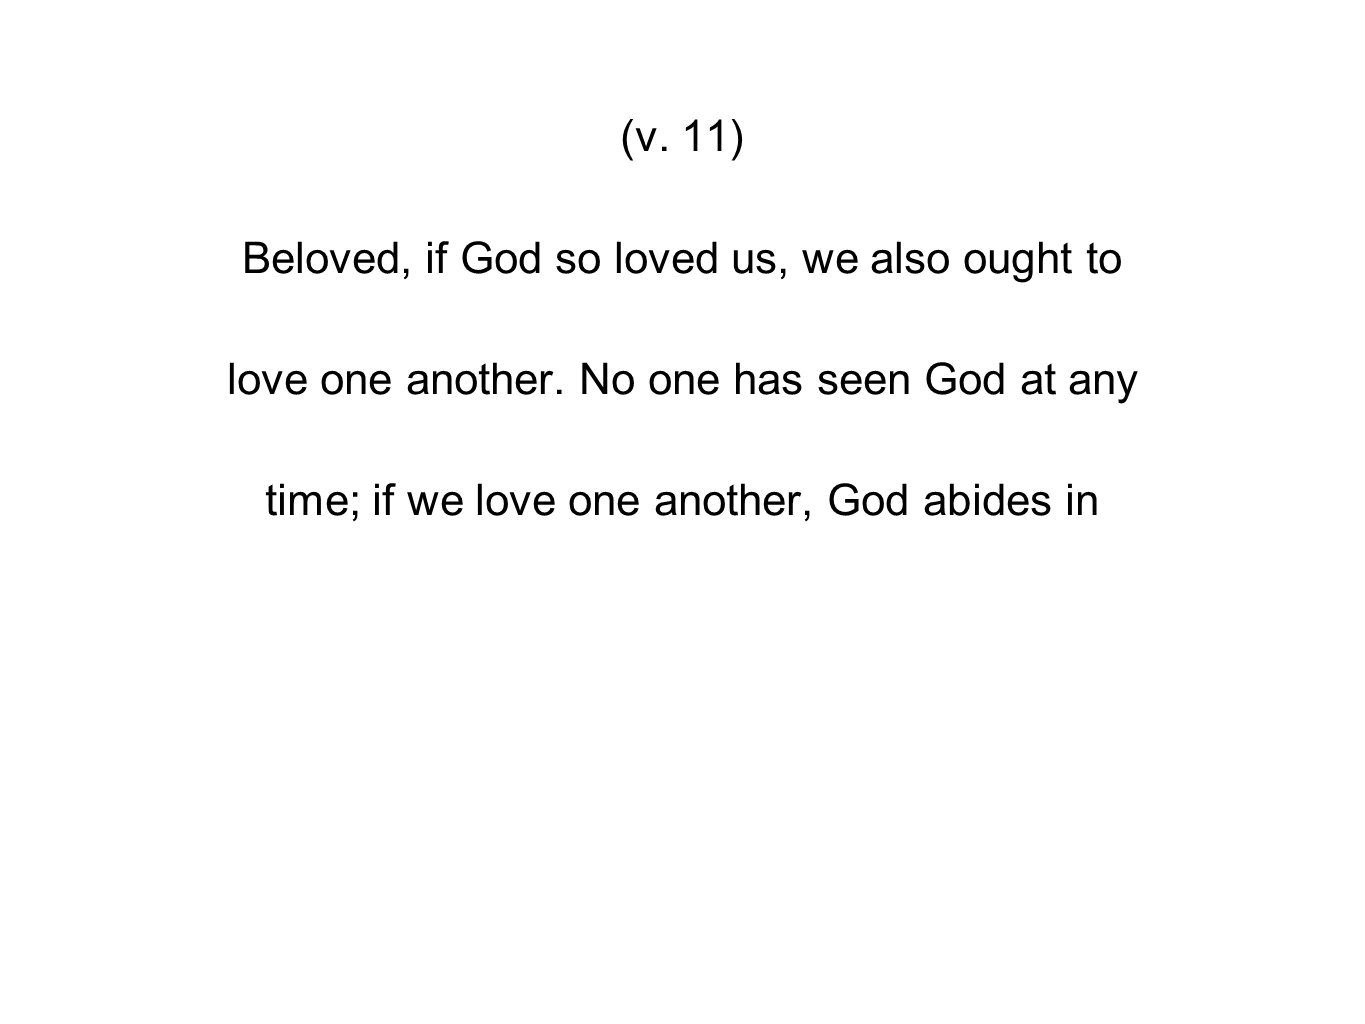 (v. 11) Beloved, if God so loved us, we also ought to love one another.